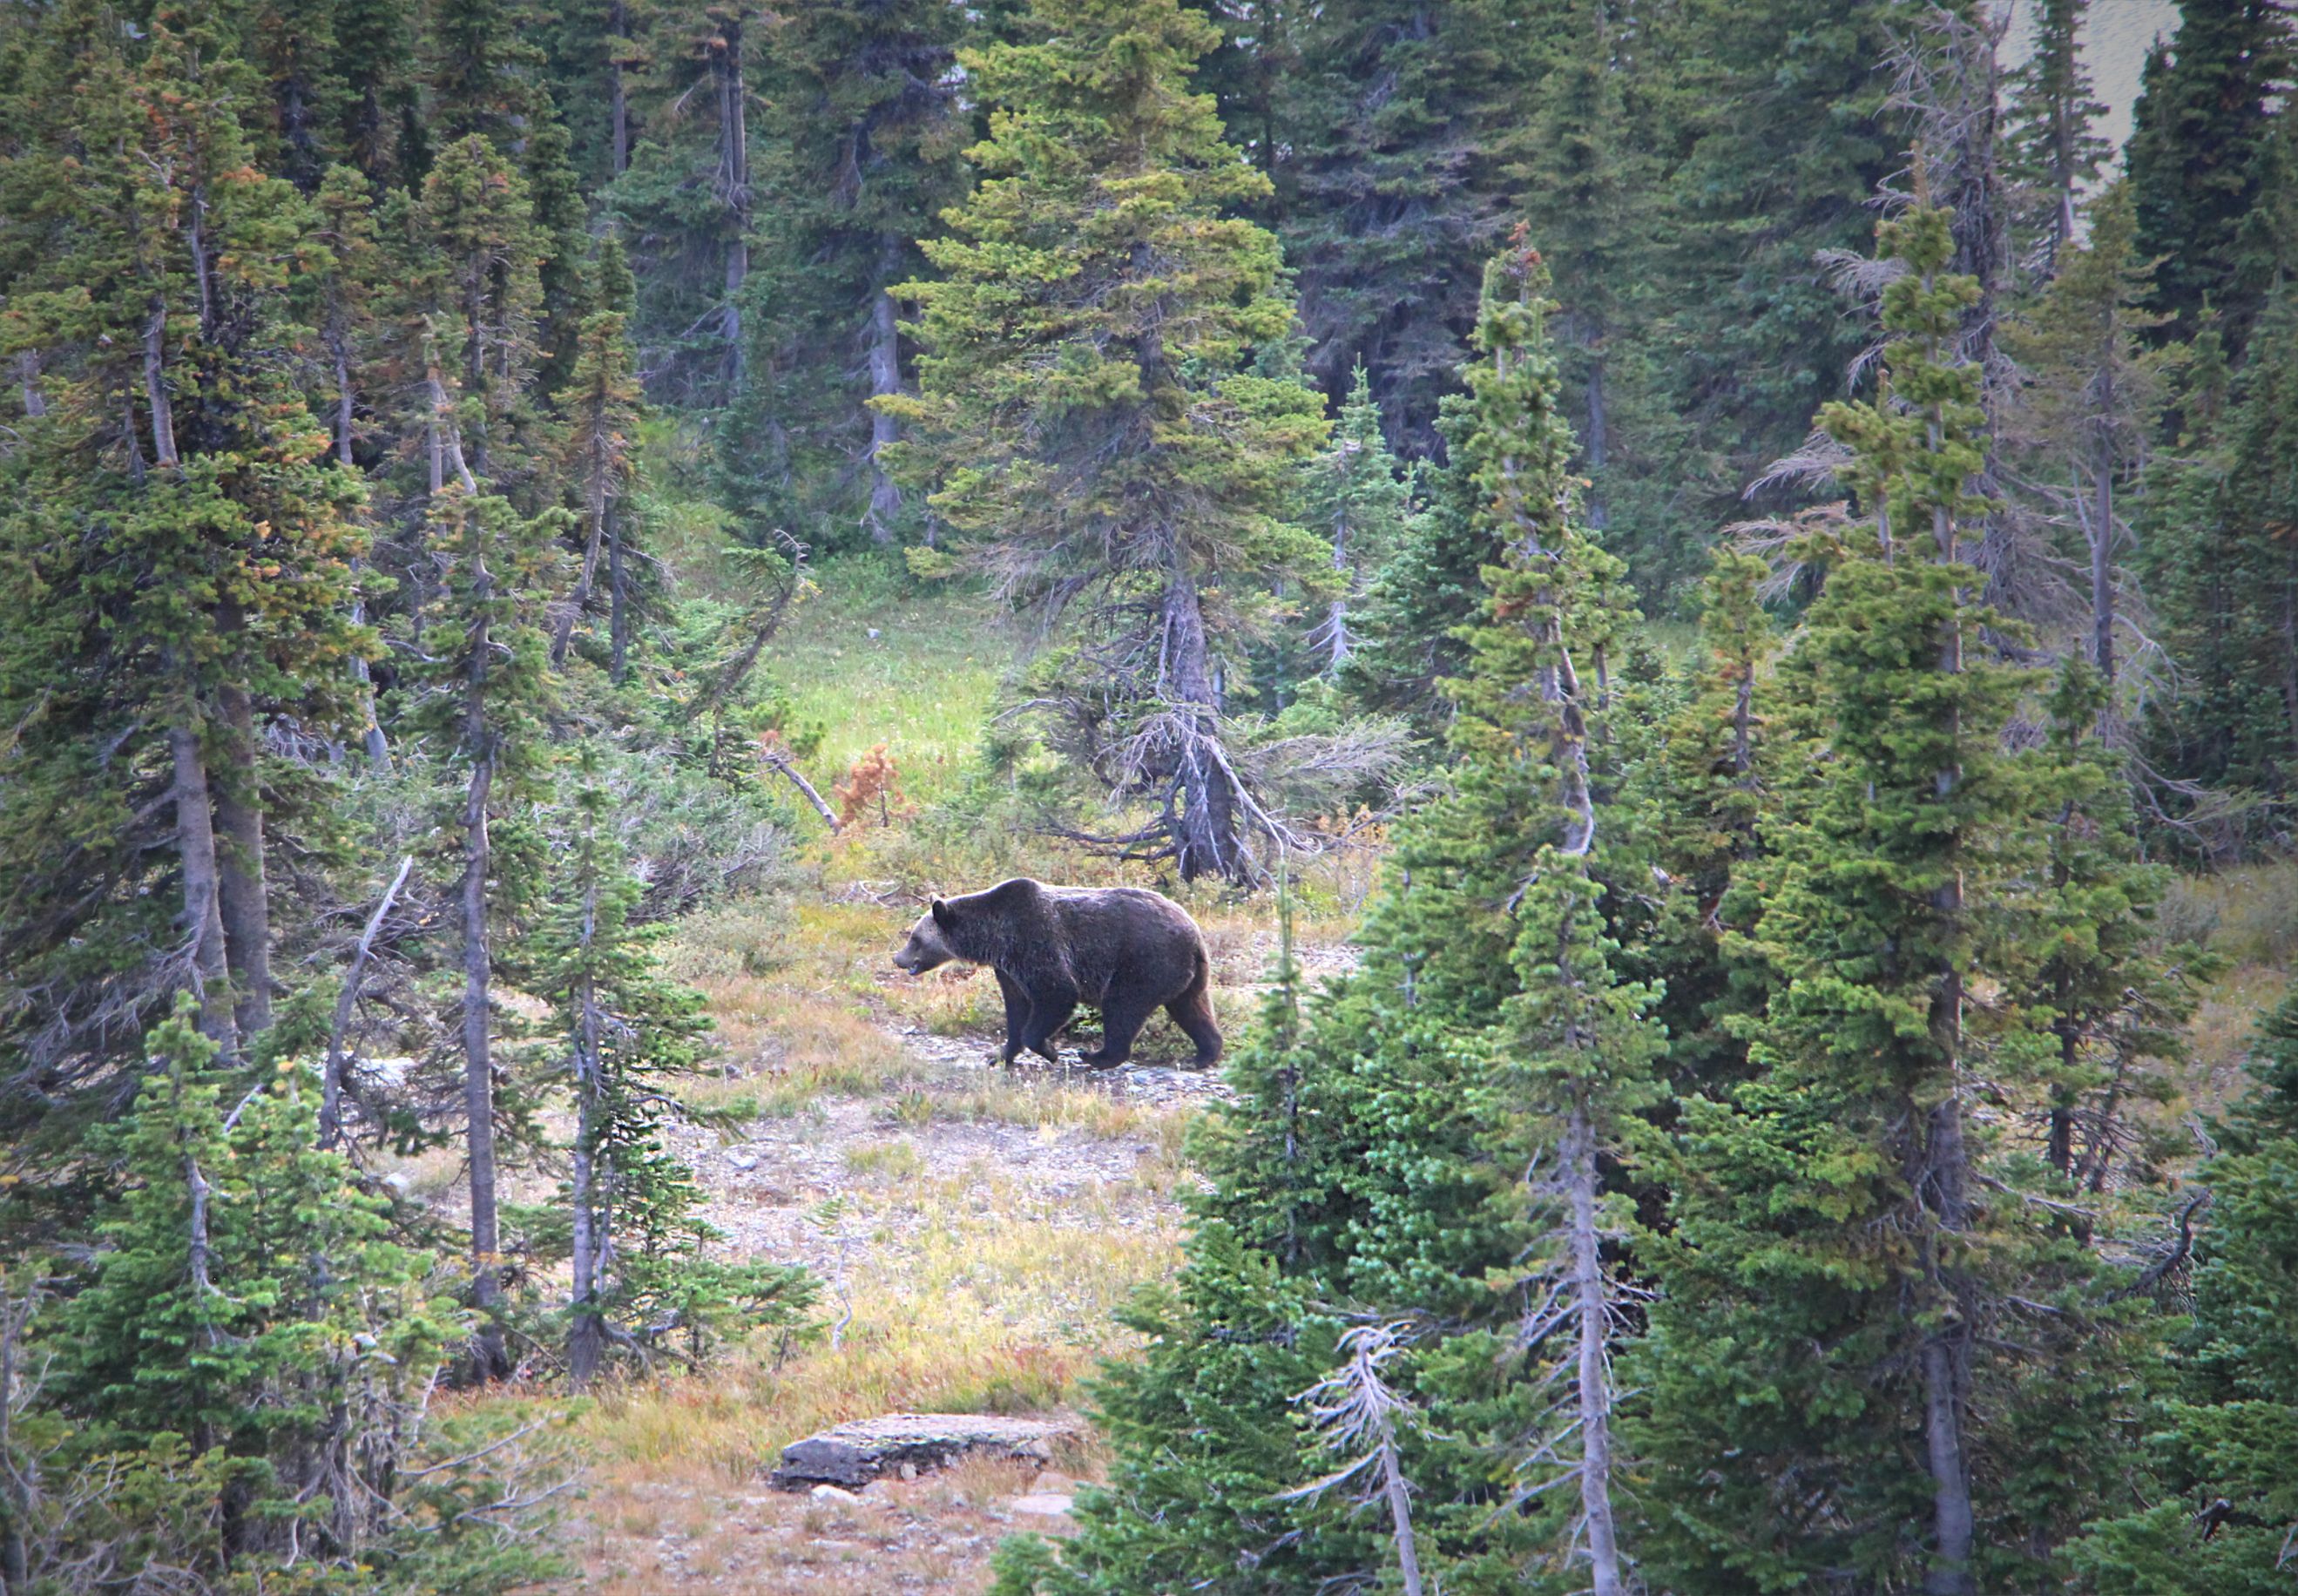 Grizzly bear female walking through the forest in Glacier National Park, USA.